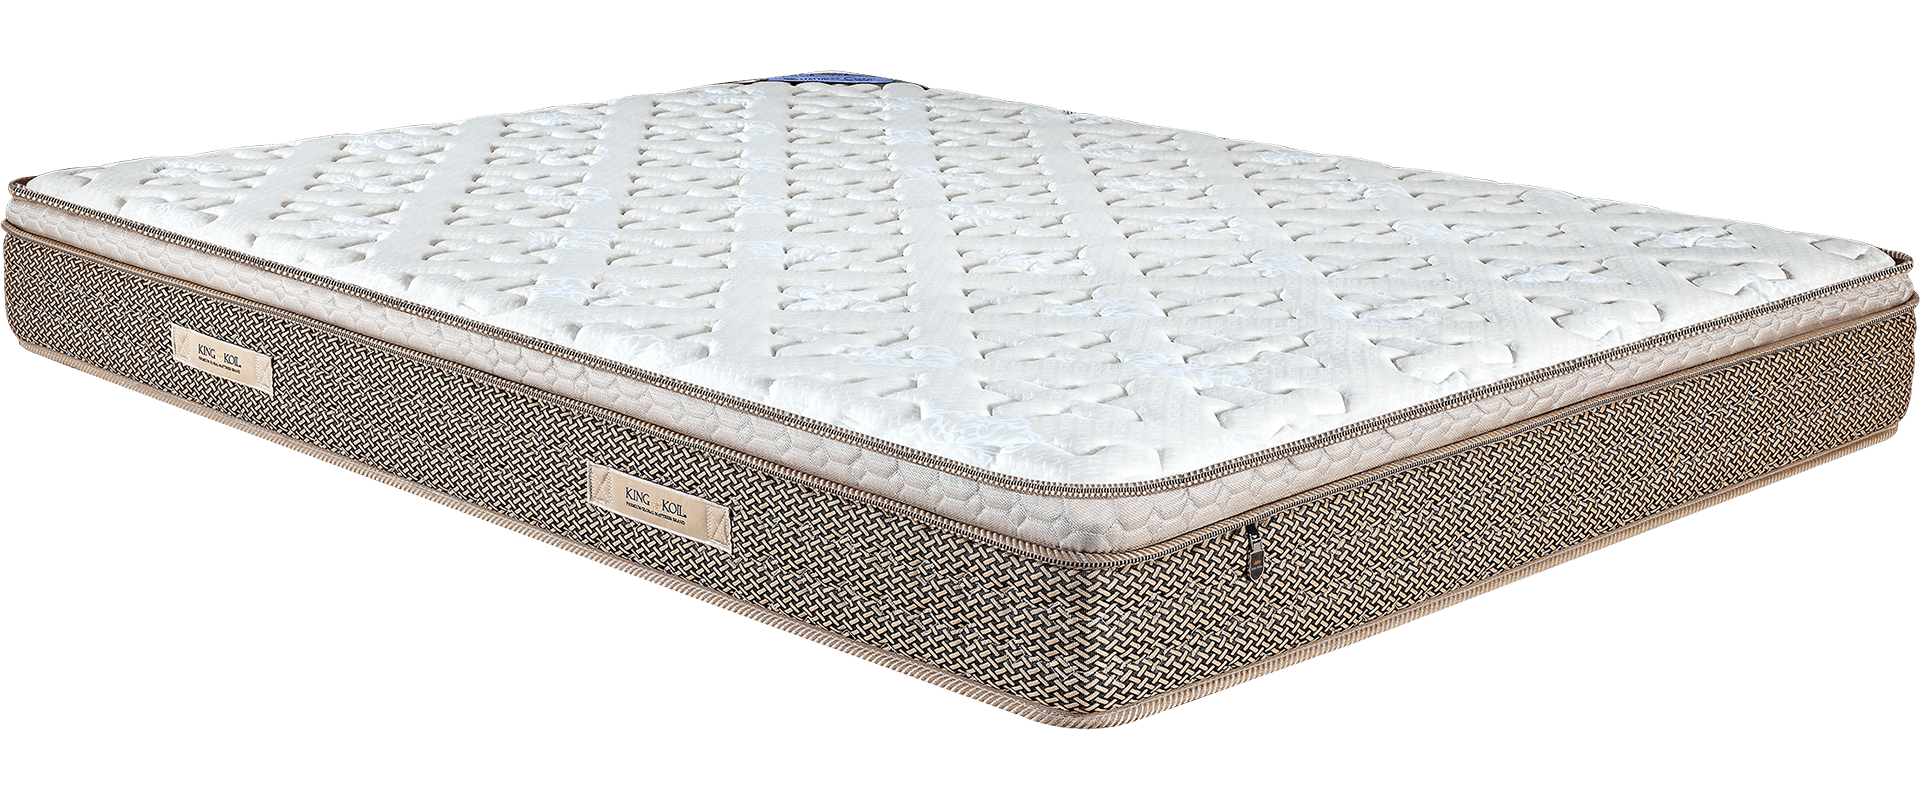 dr ortho mattress single bed